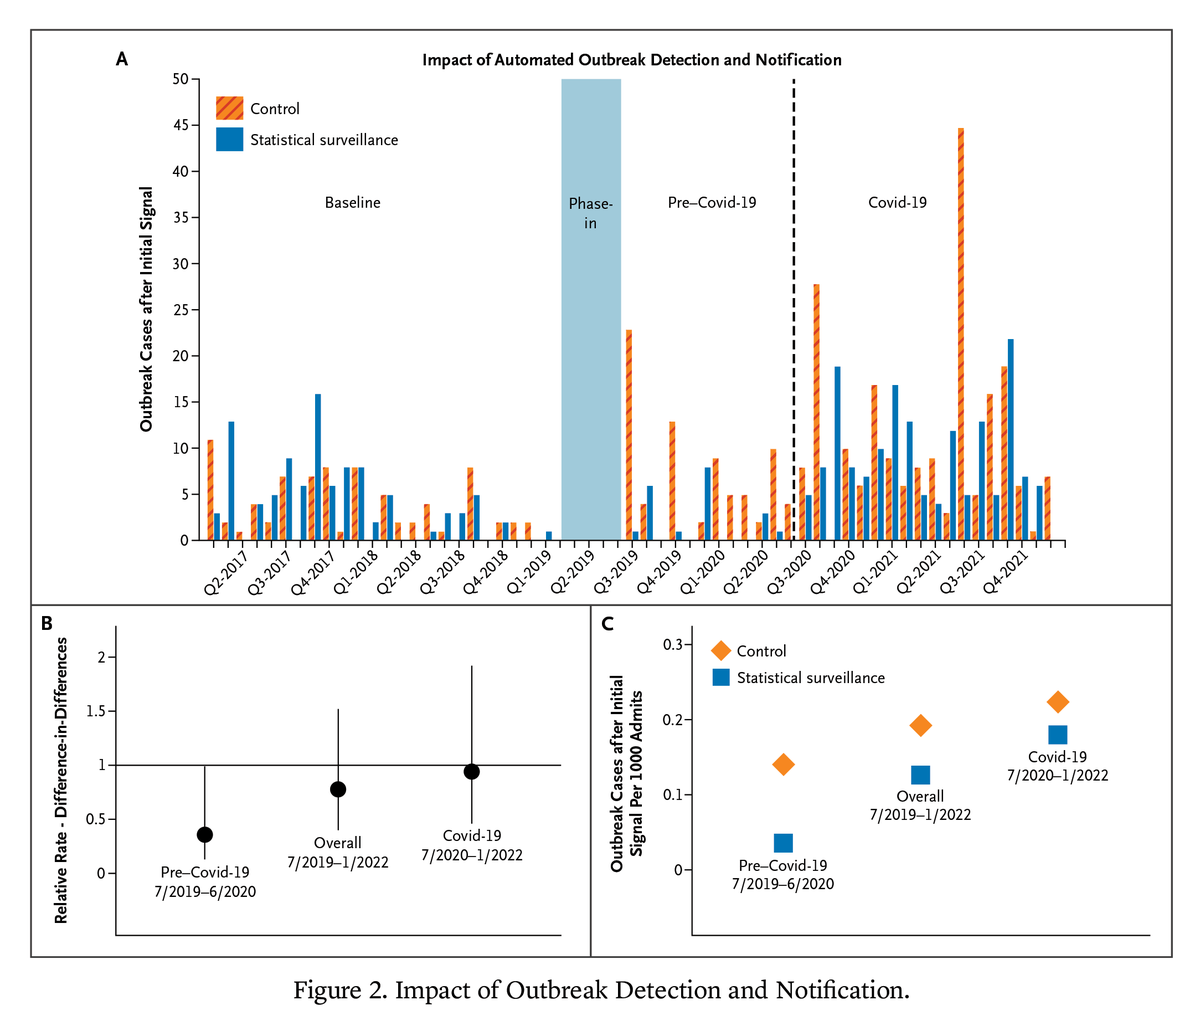 Automated surveillance for outbreaks using microbiology data and a space-time scan statistic to alert personnel to an outbreak in progress did not significantly reduce the overall size or duration of outbreaks in this large cluster-randomized trial. 1/2